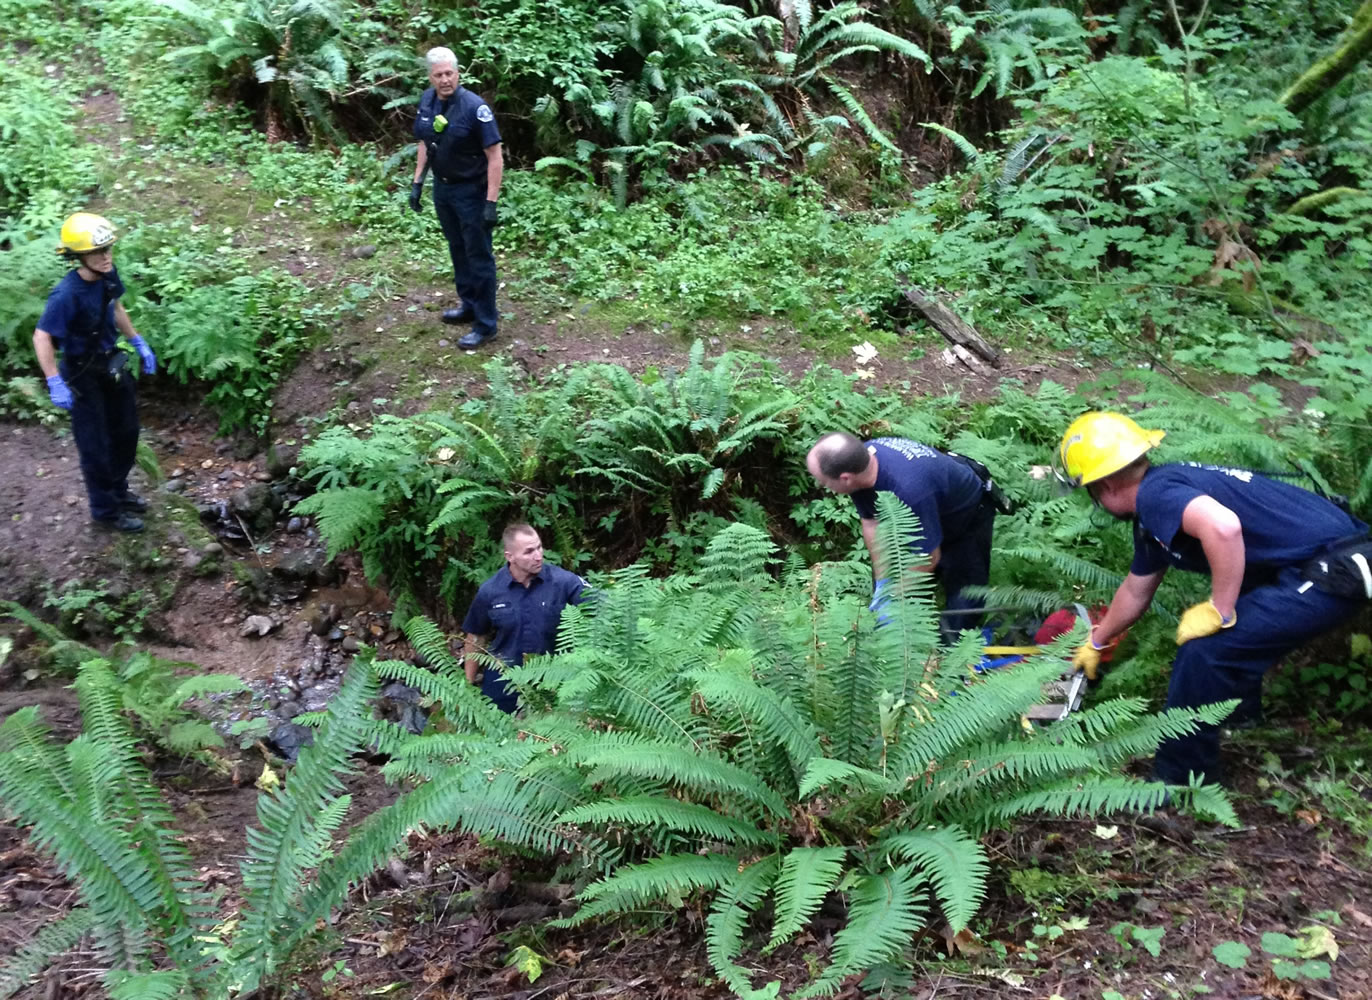 Fire crews work during the rescue of a 13-year-old who suffered head injuries when he fell from a rope swing in a heavily forested canyon near Camas.